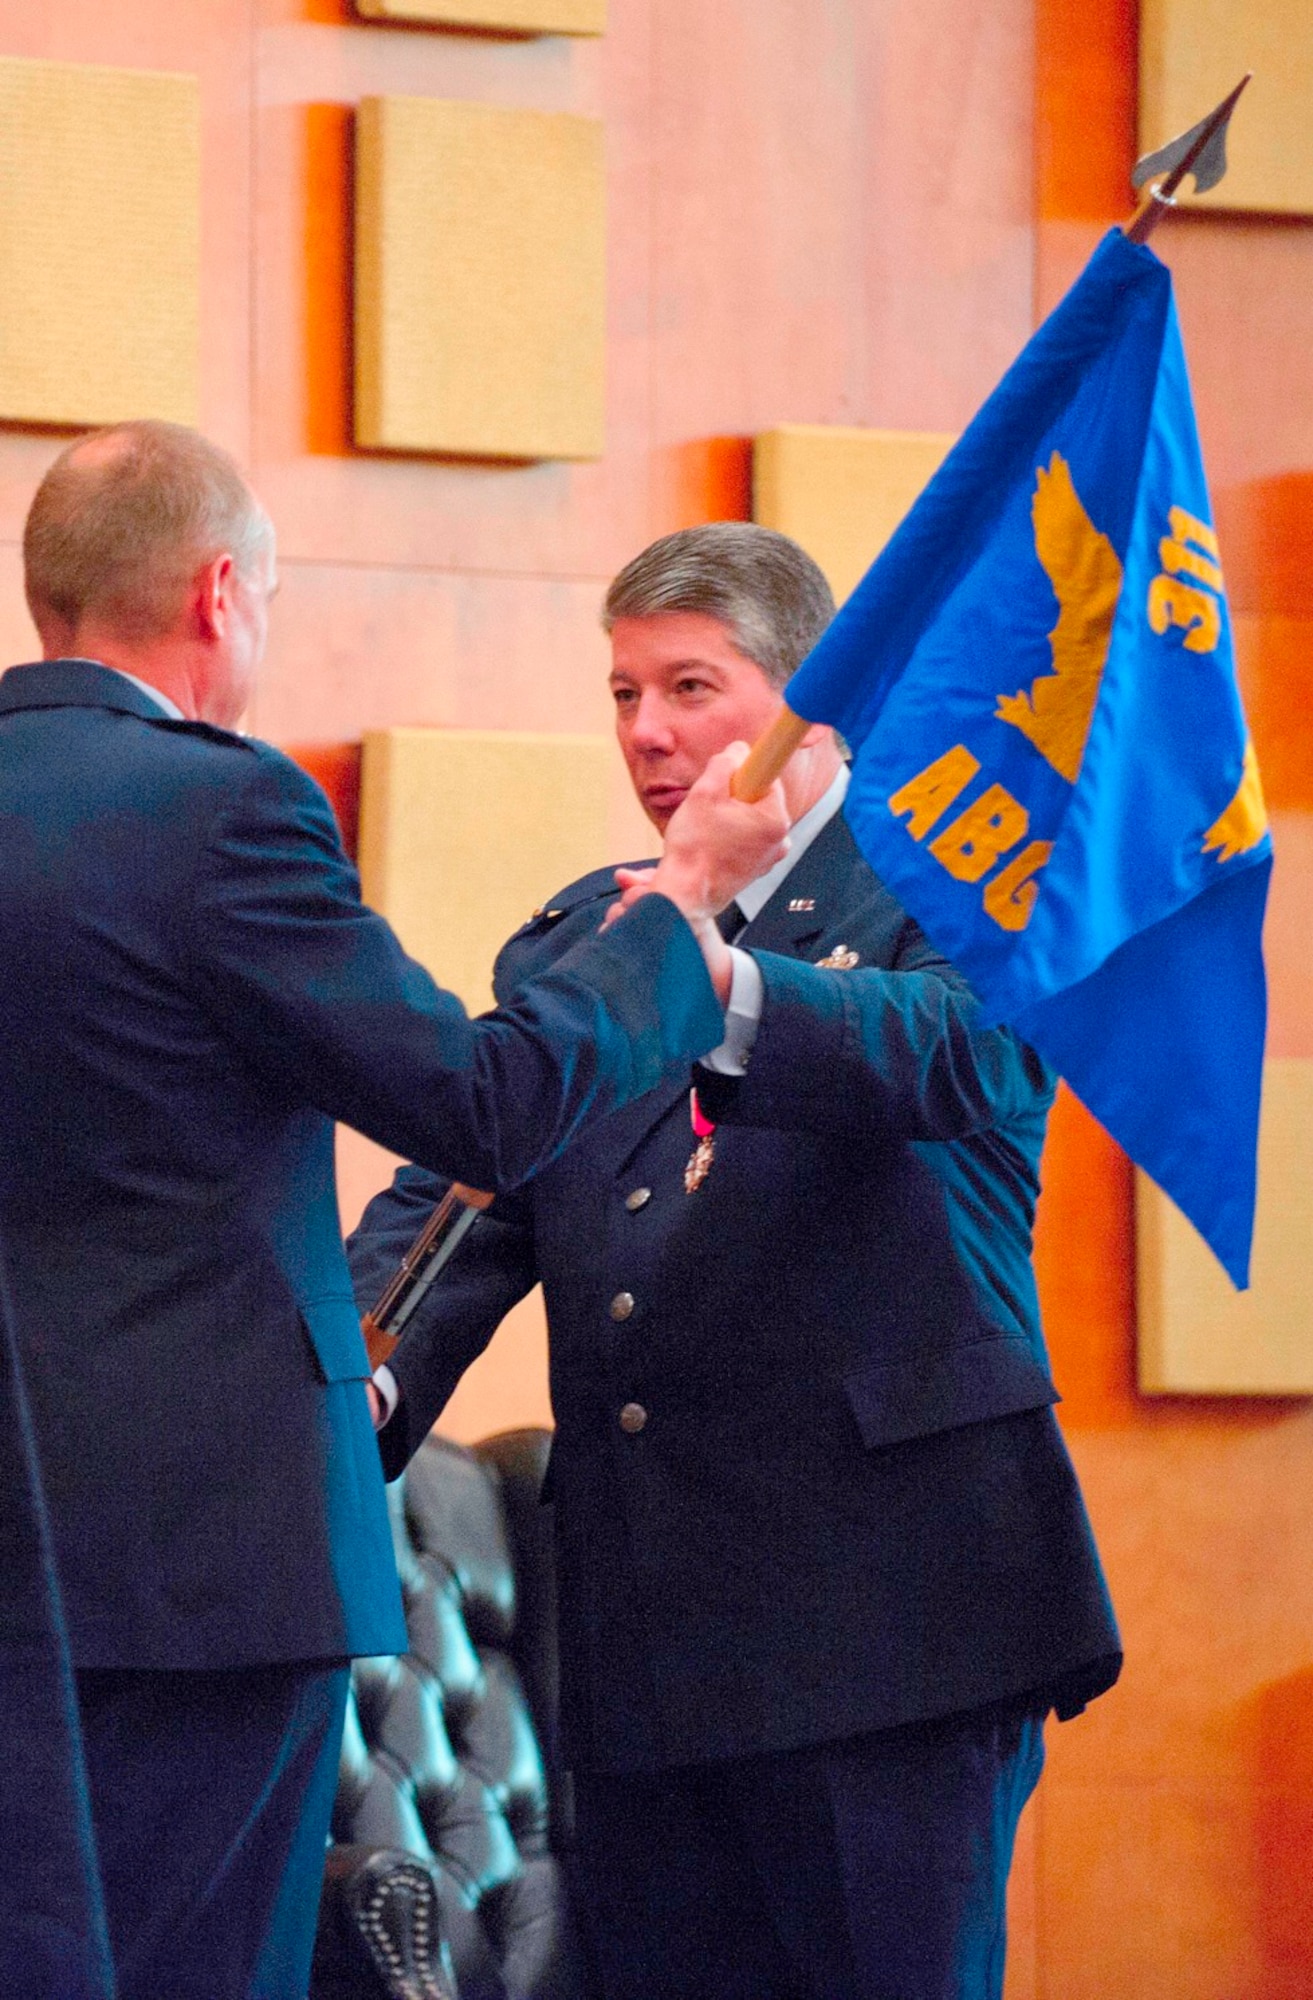 AFMC commander Gen. Donald J. Hoffman accepts the guidon of the 311th Air Base Group from Col. Harry R. Kimberly III, the last commander at Brooks, at the inactivation ceremony. (U.S. Air Force photo/Steve Thurow)
